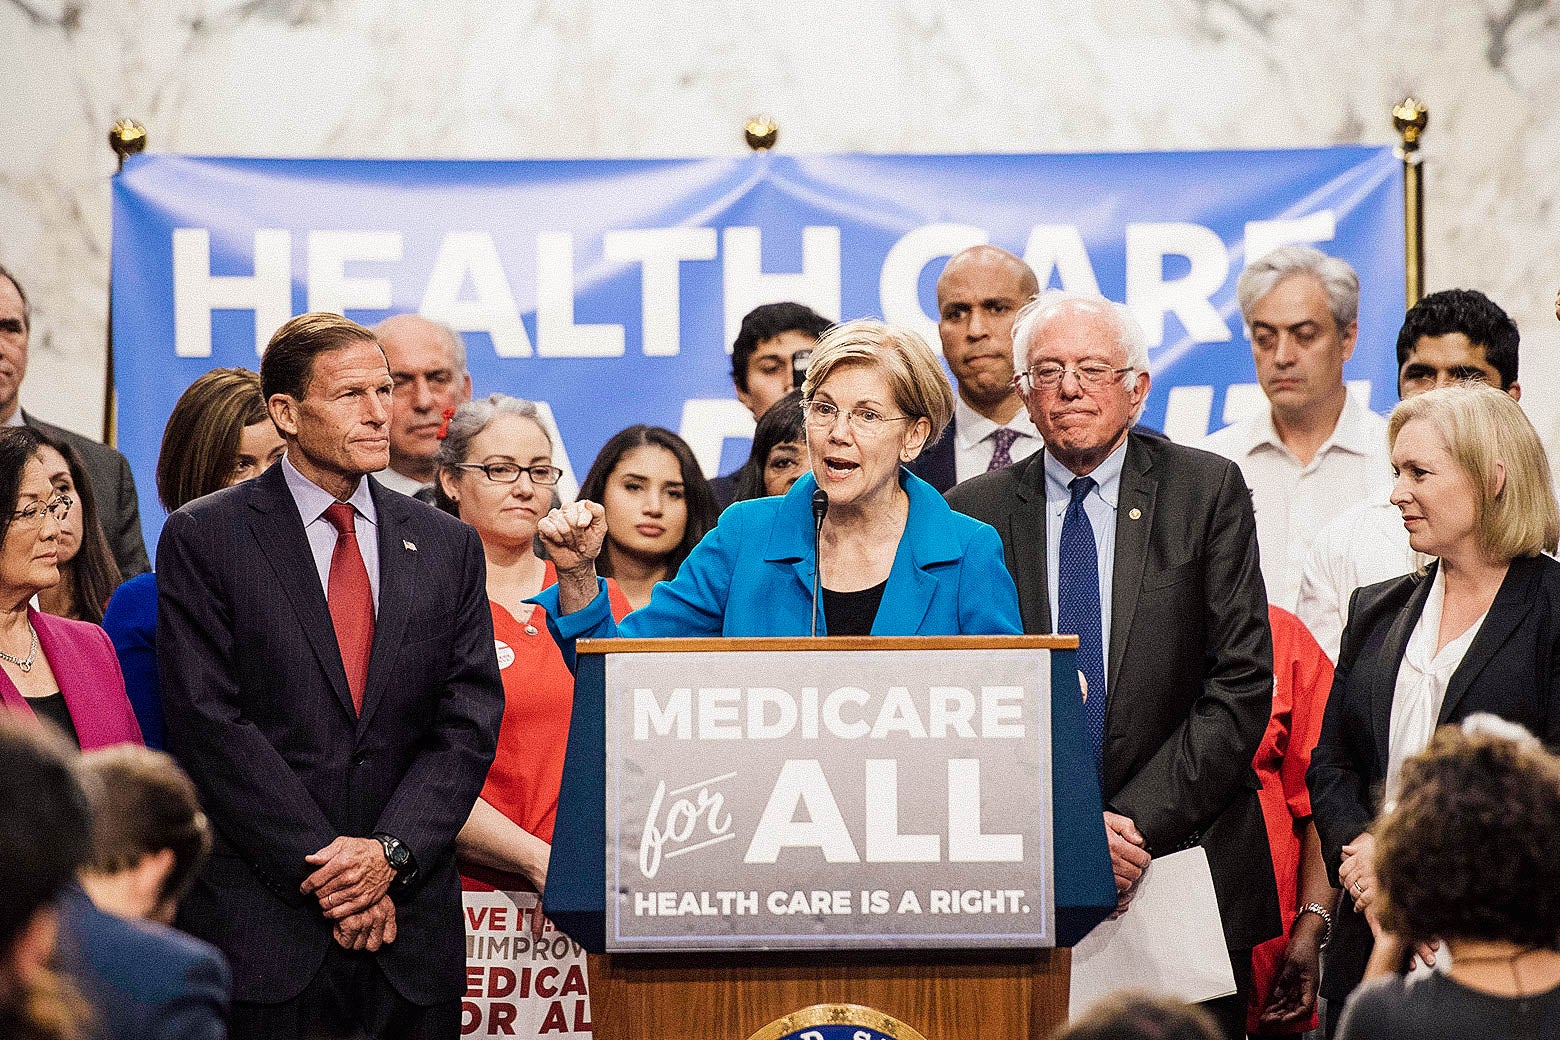 Elizabeth Warren at a podium that says, "Medicare for all," with Bernie Sanders and other senators around her.